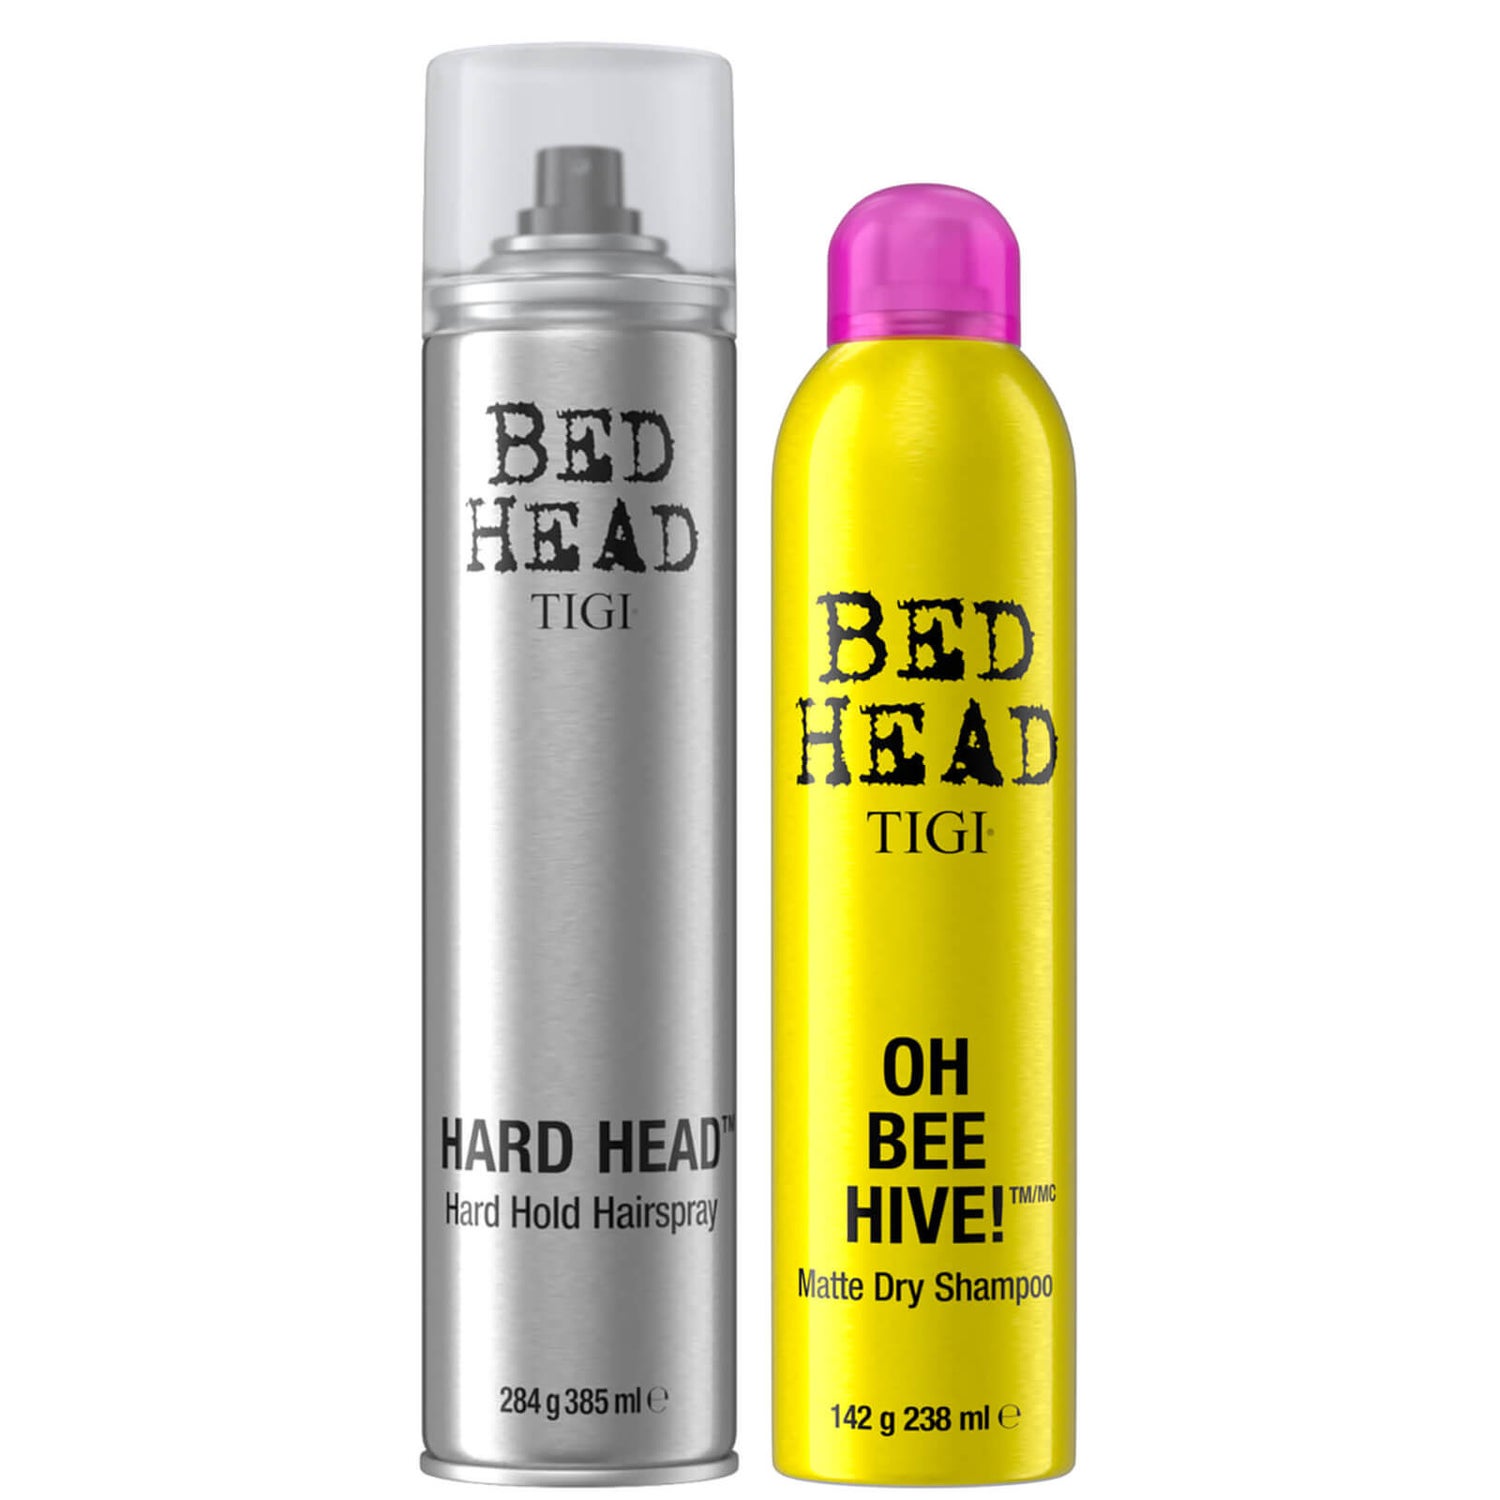 TIGI Bed Head Hair Styling Set with Dry Shampoo and Hairspray | Buy Online  | Mankind